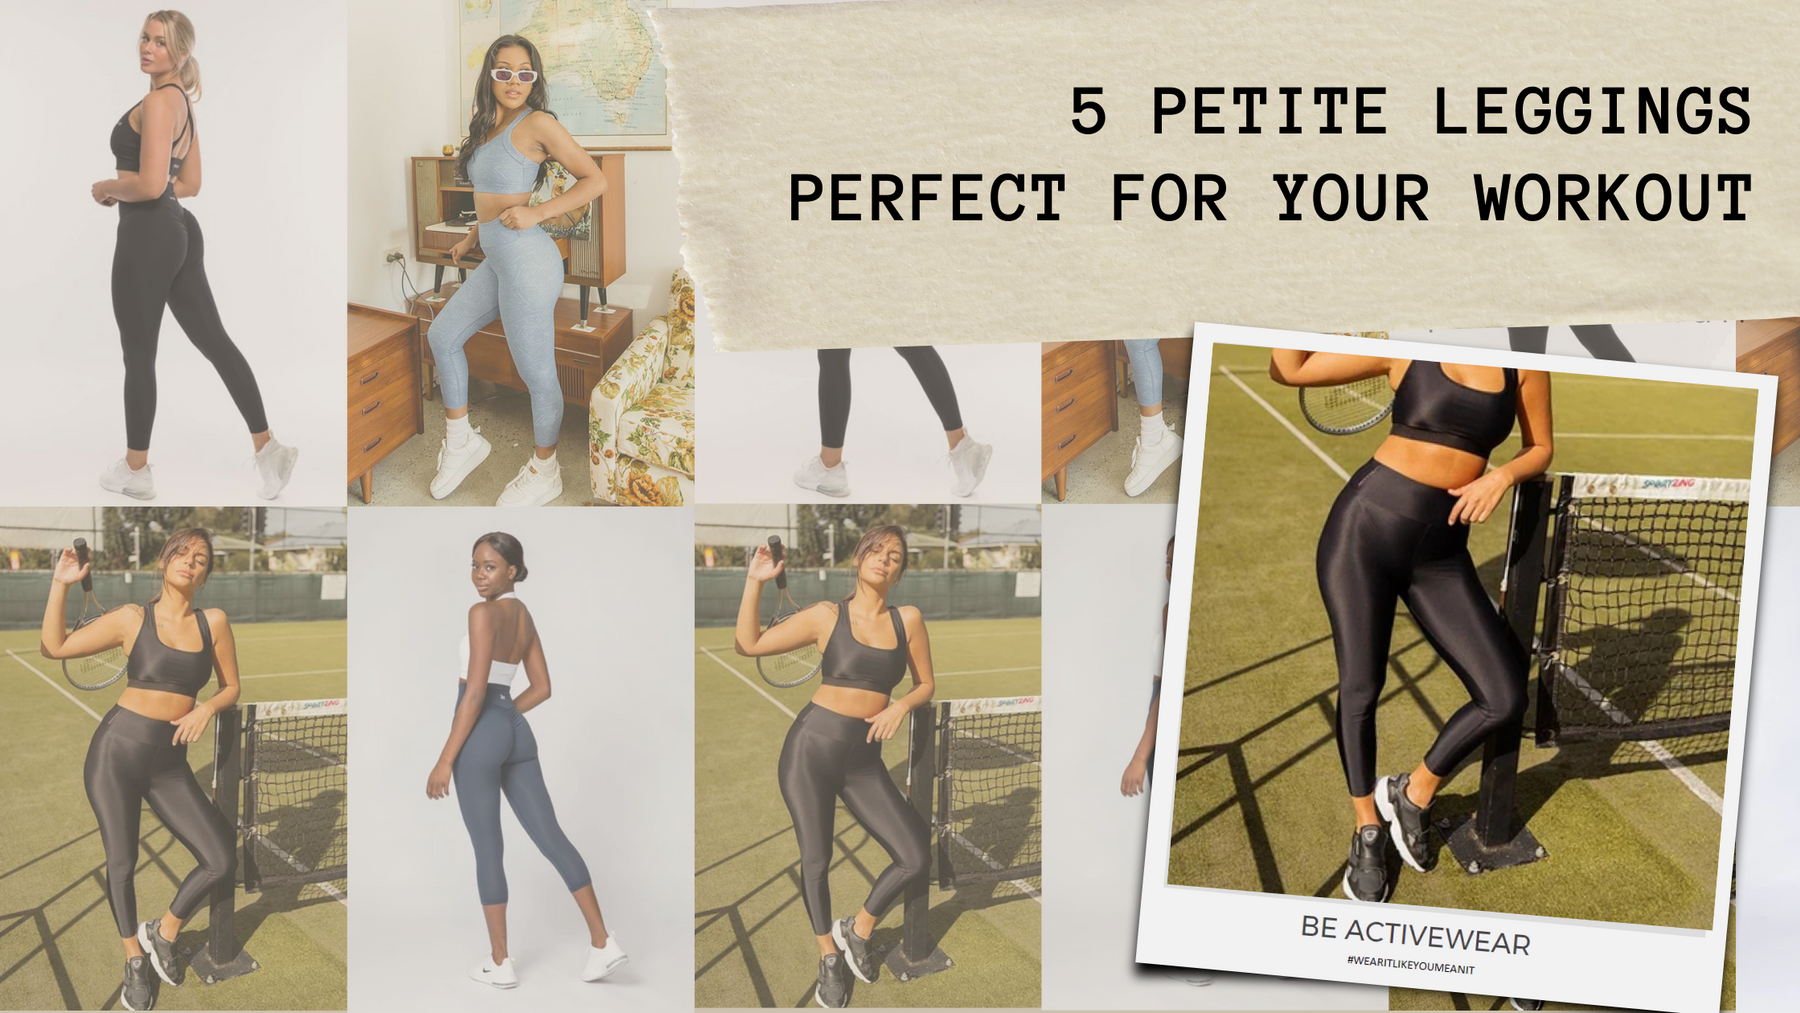 5 Petite Leggings Perfect For Your Workout